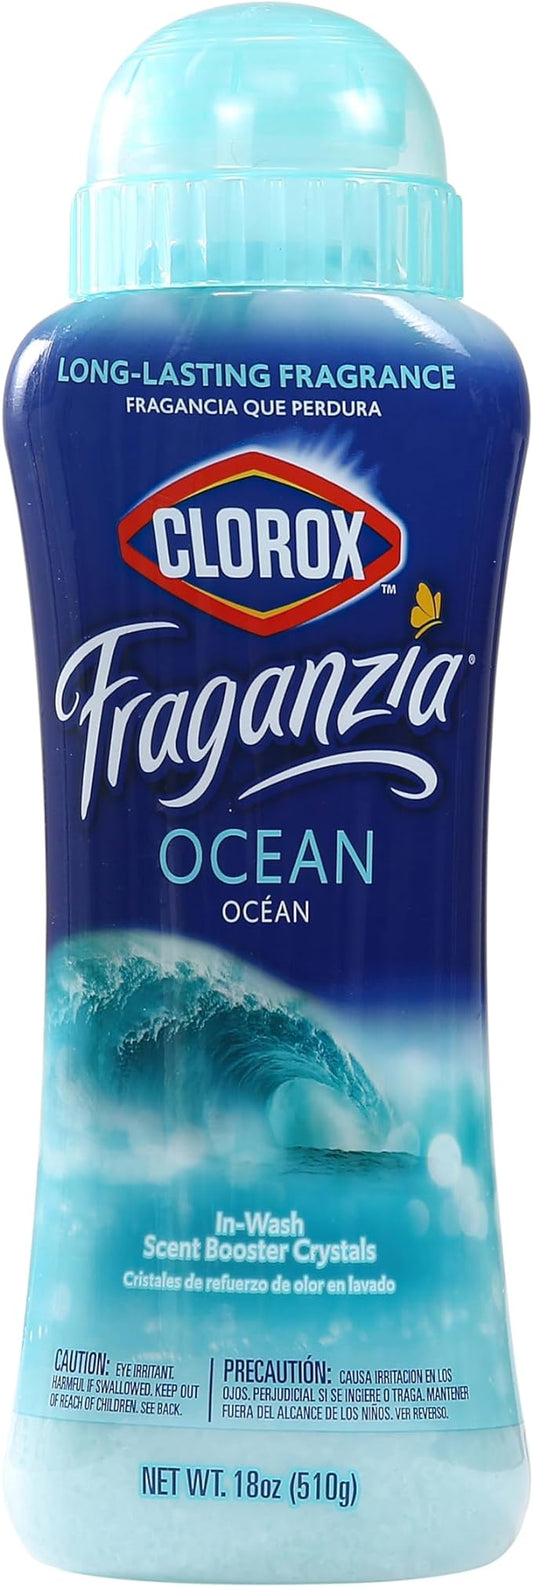 Clorox Fraganzia In-Wash Scent Booster Crystals in Ocean Scent, 18 Oz | Laundry Scent Booster Crystals | Fresh Ocean Breeze Laundry Fragrance 18 Ounce Crystals